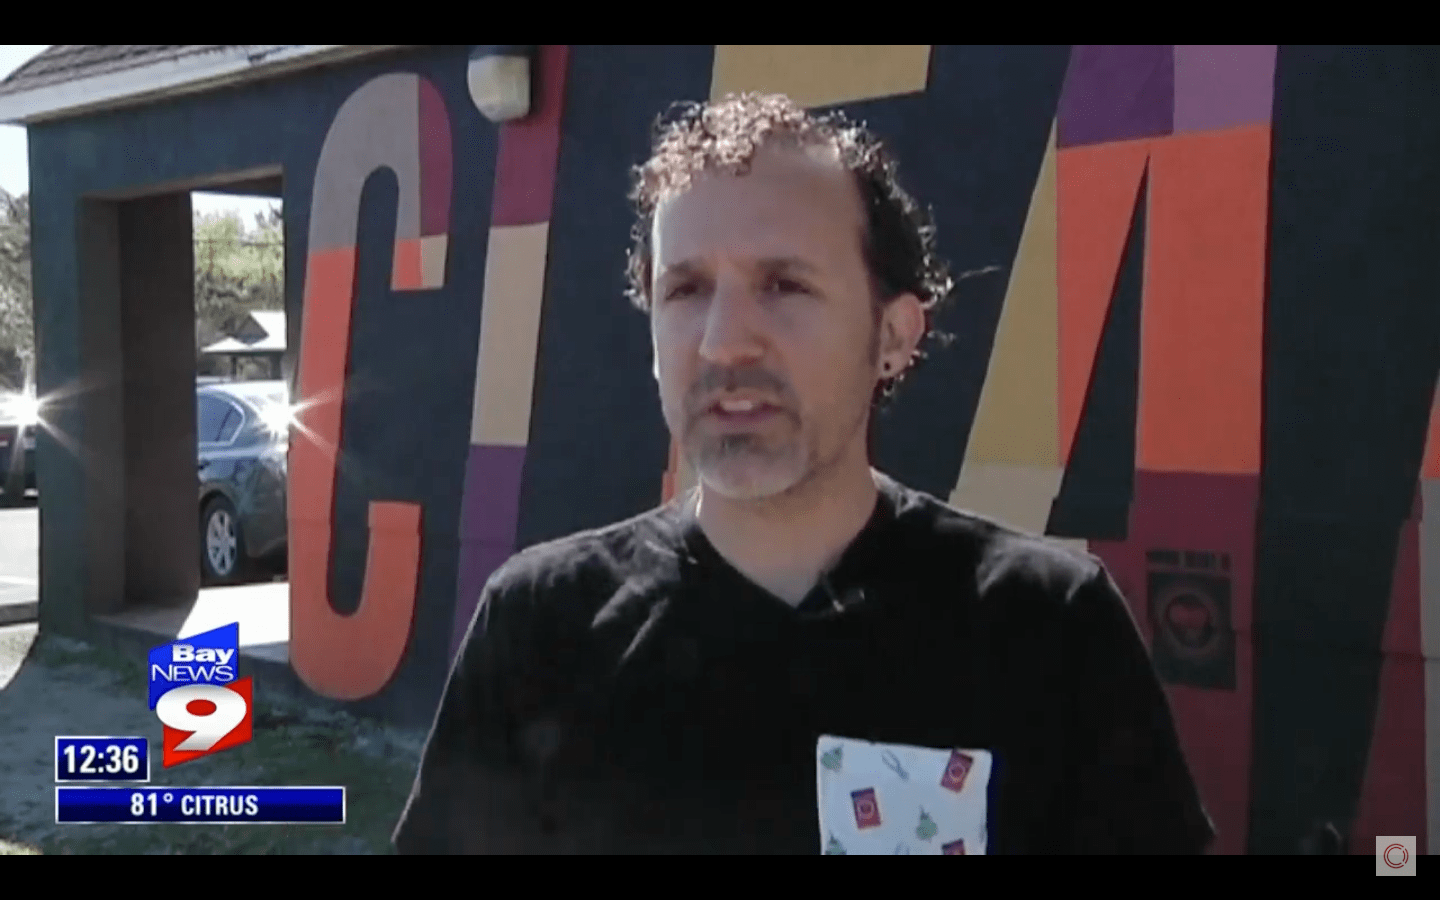 Bay News 9 Laundry Project CLEAN Campaign Mural Story